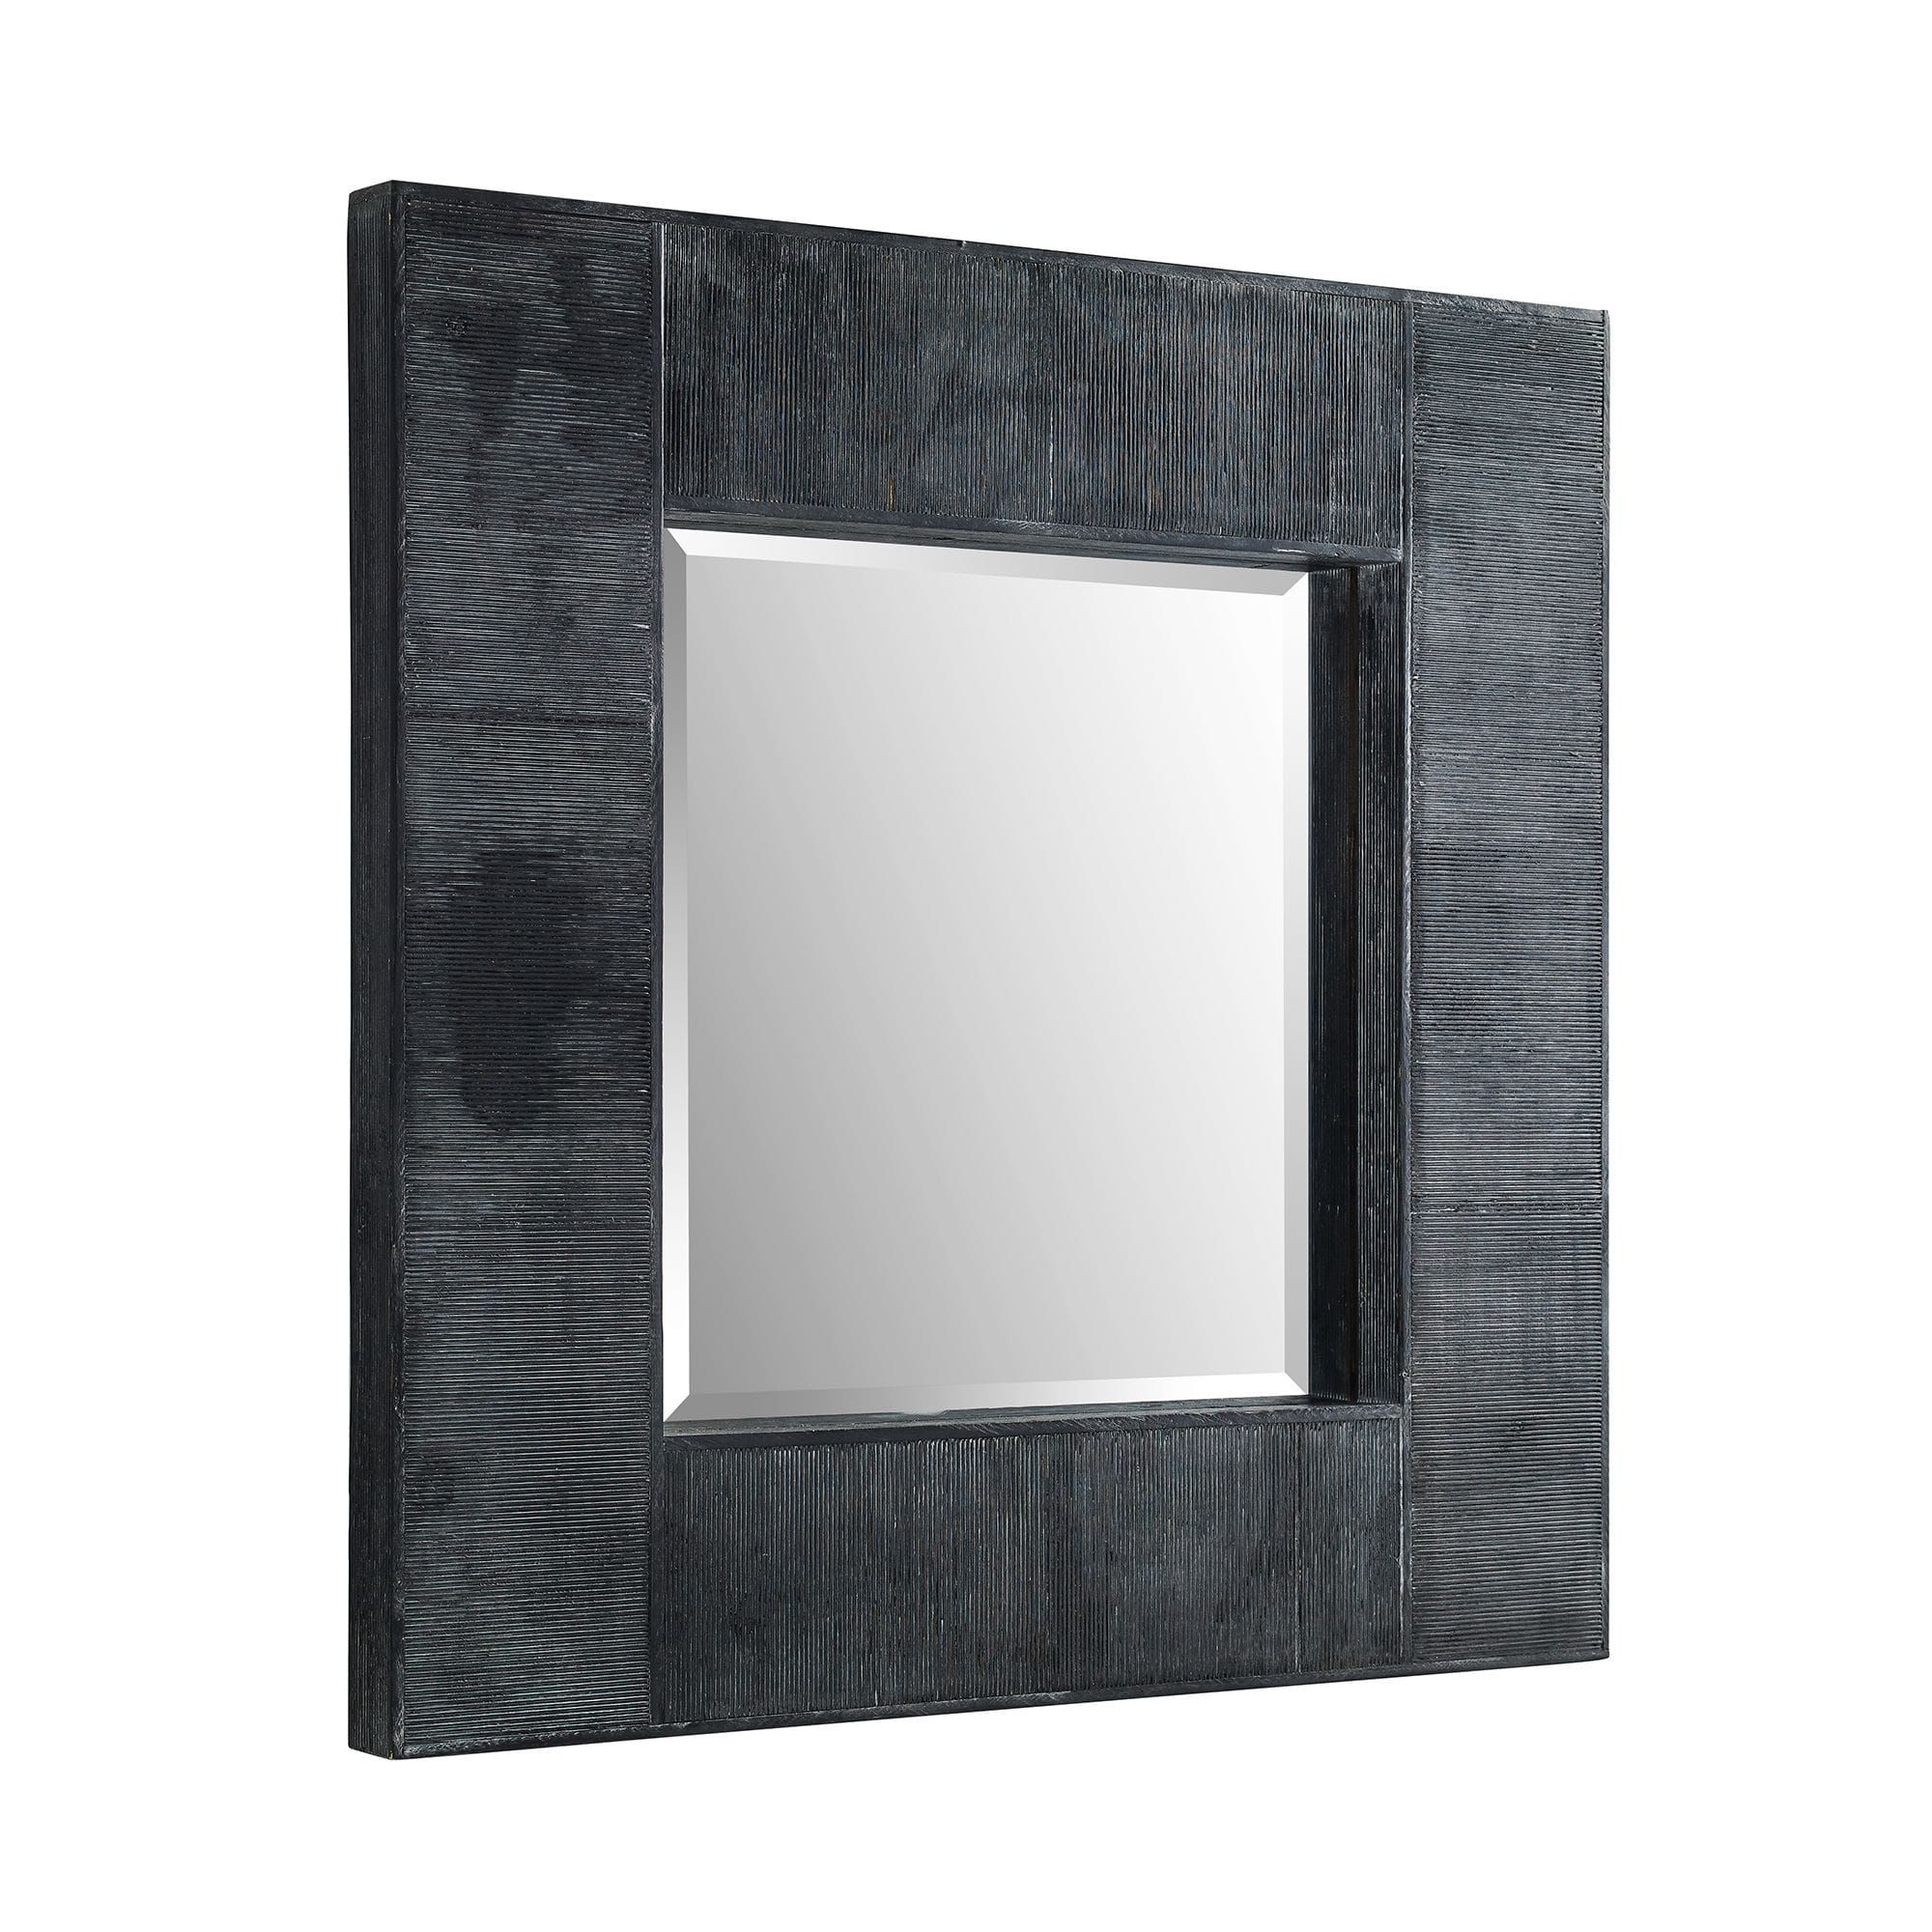 32 Inch Modern Industrial Square Wall Mirrorwalker Edison In Black Square Wall Mirrors (View 9 of 15)